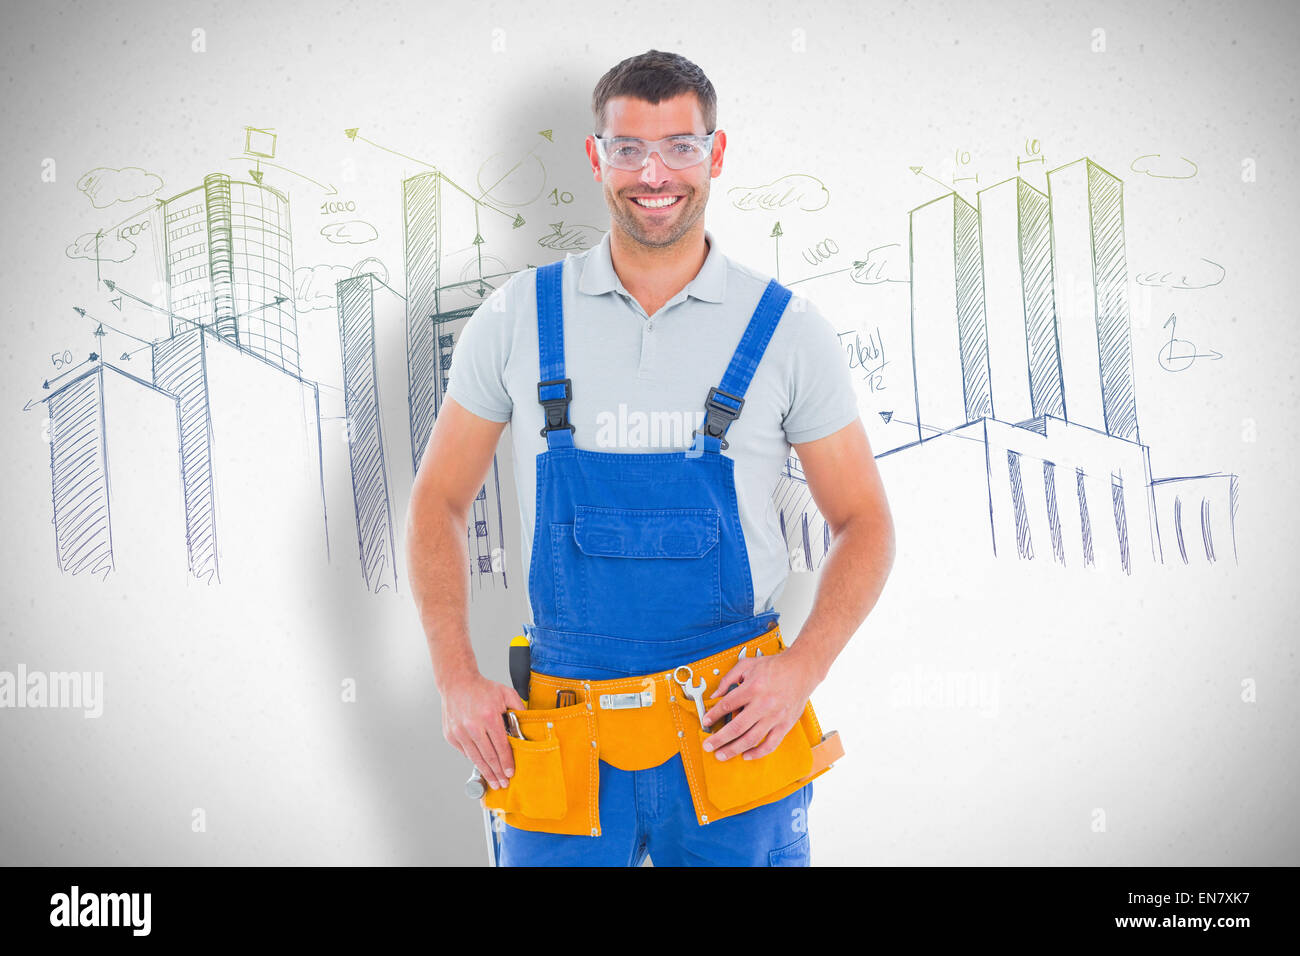 Composite image of confident manual worker Stock Photo